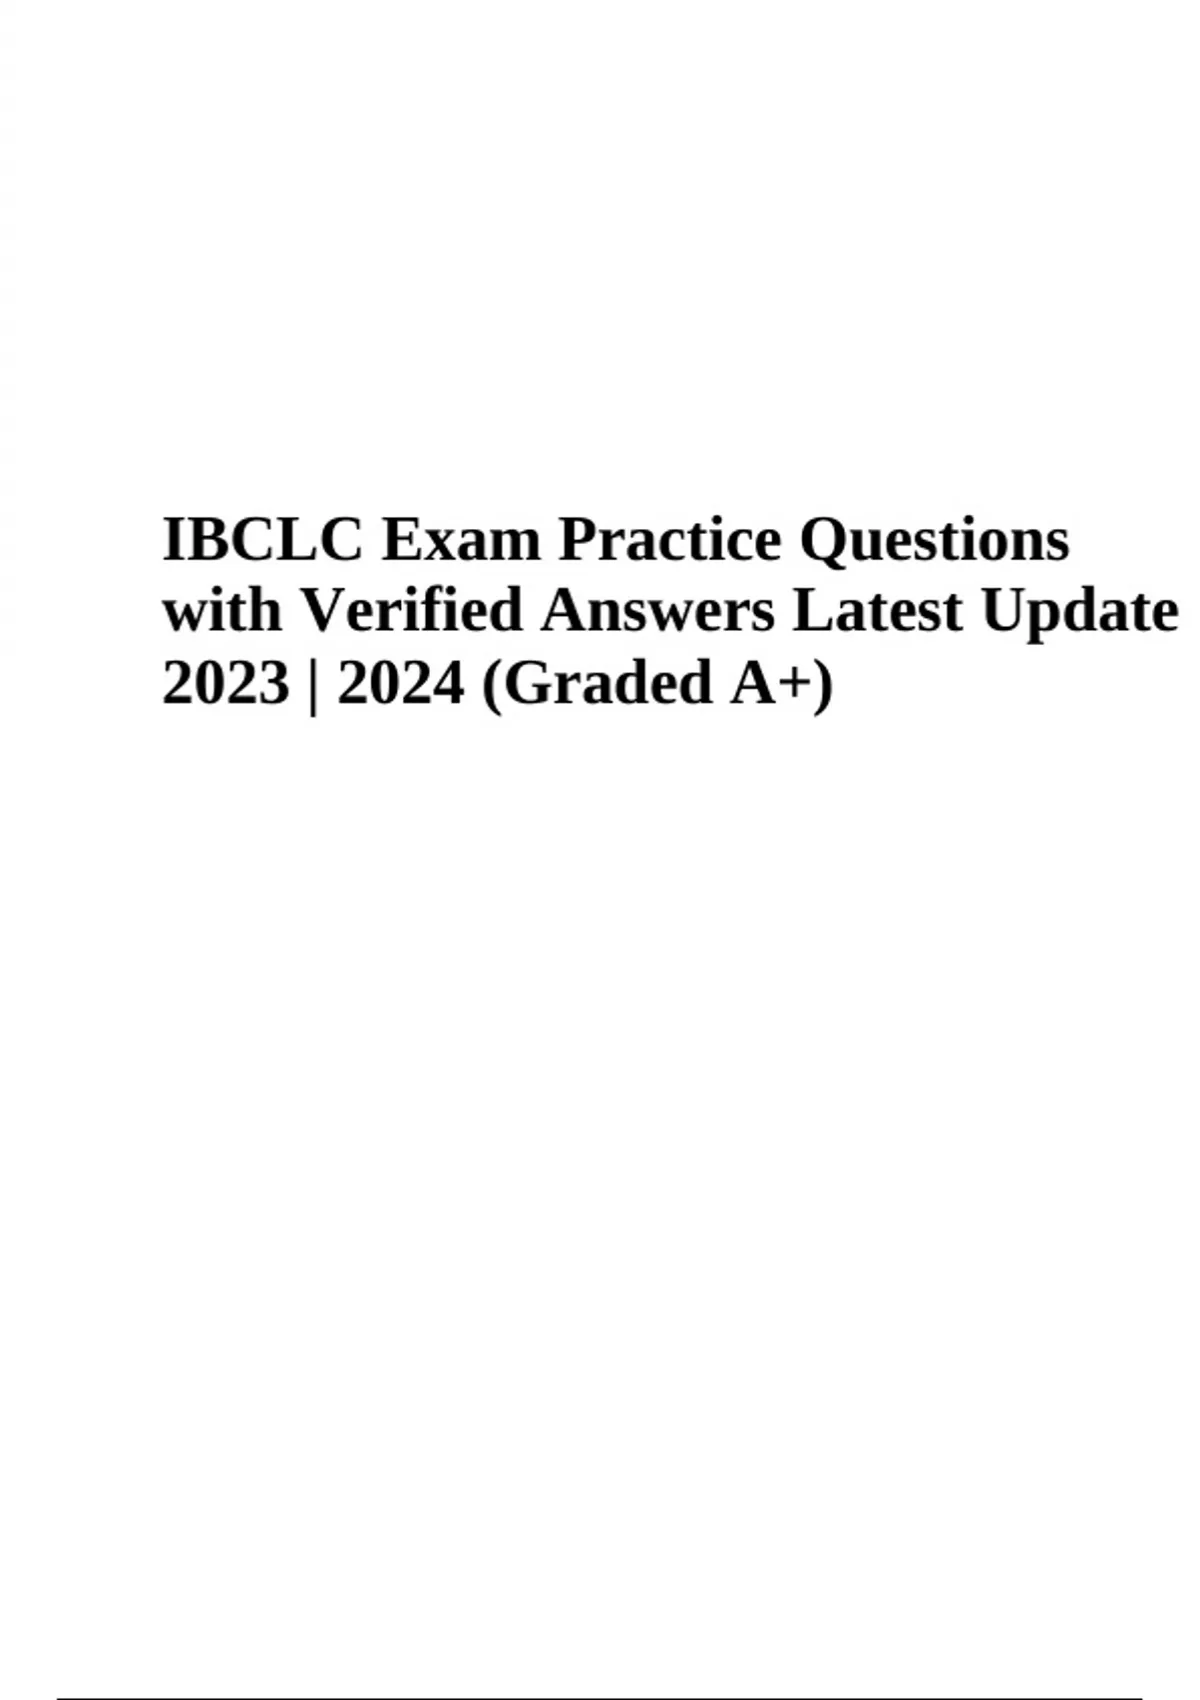 IBCLC Exam Practice Questions with Correct Answers Latest Update 2023